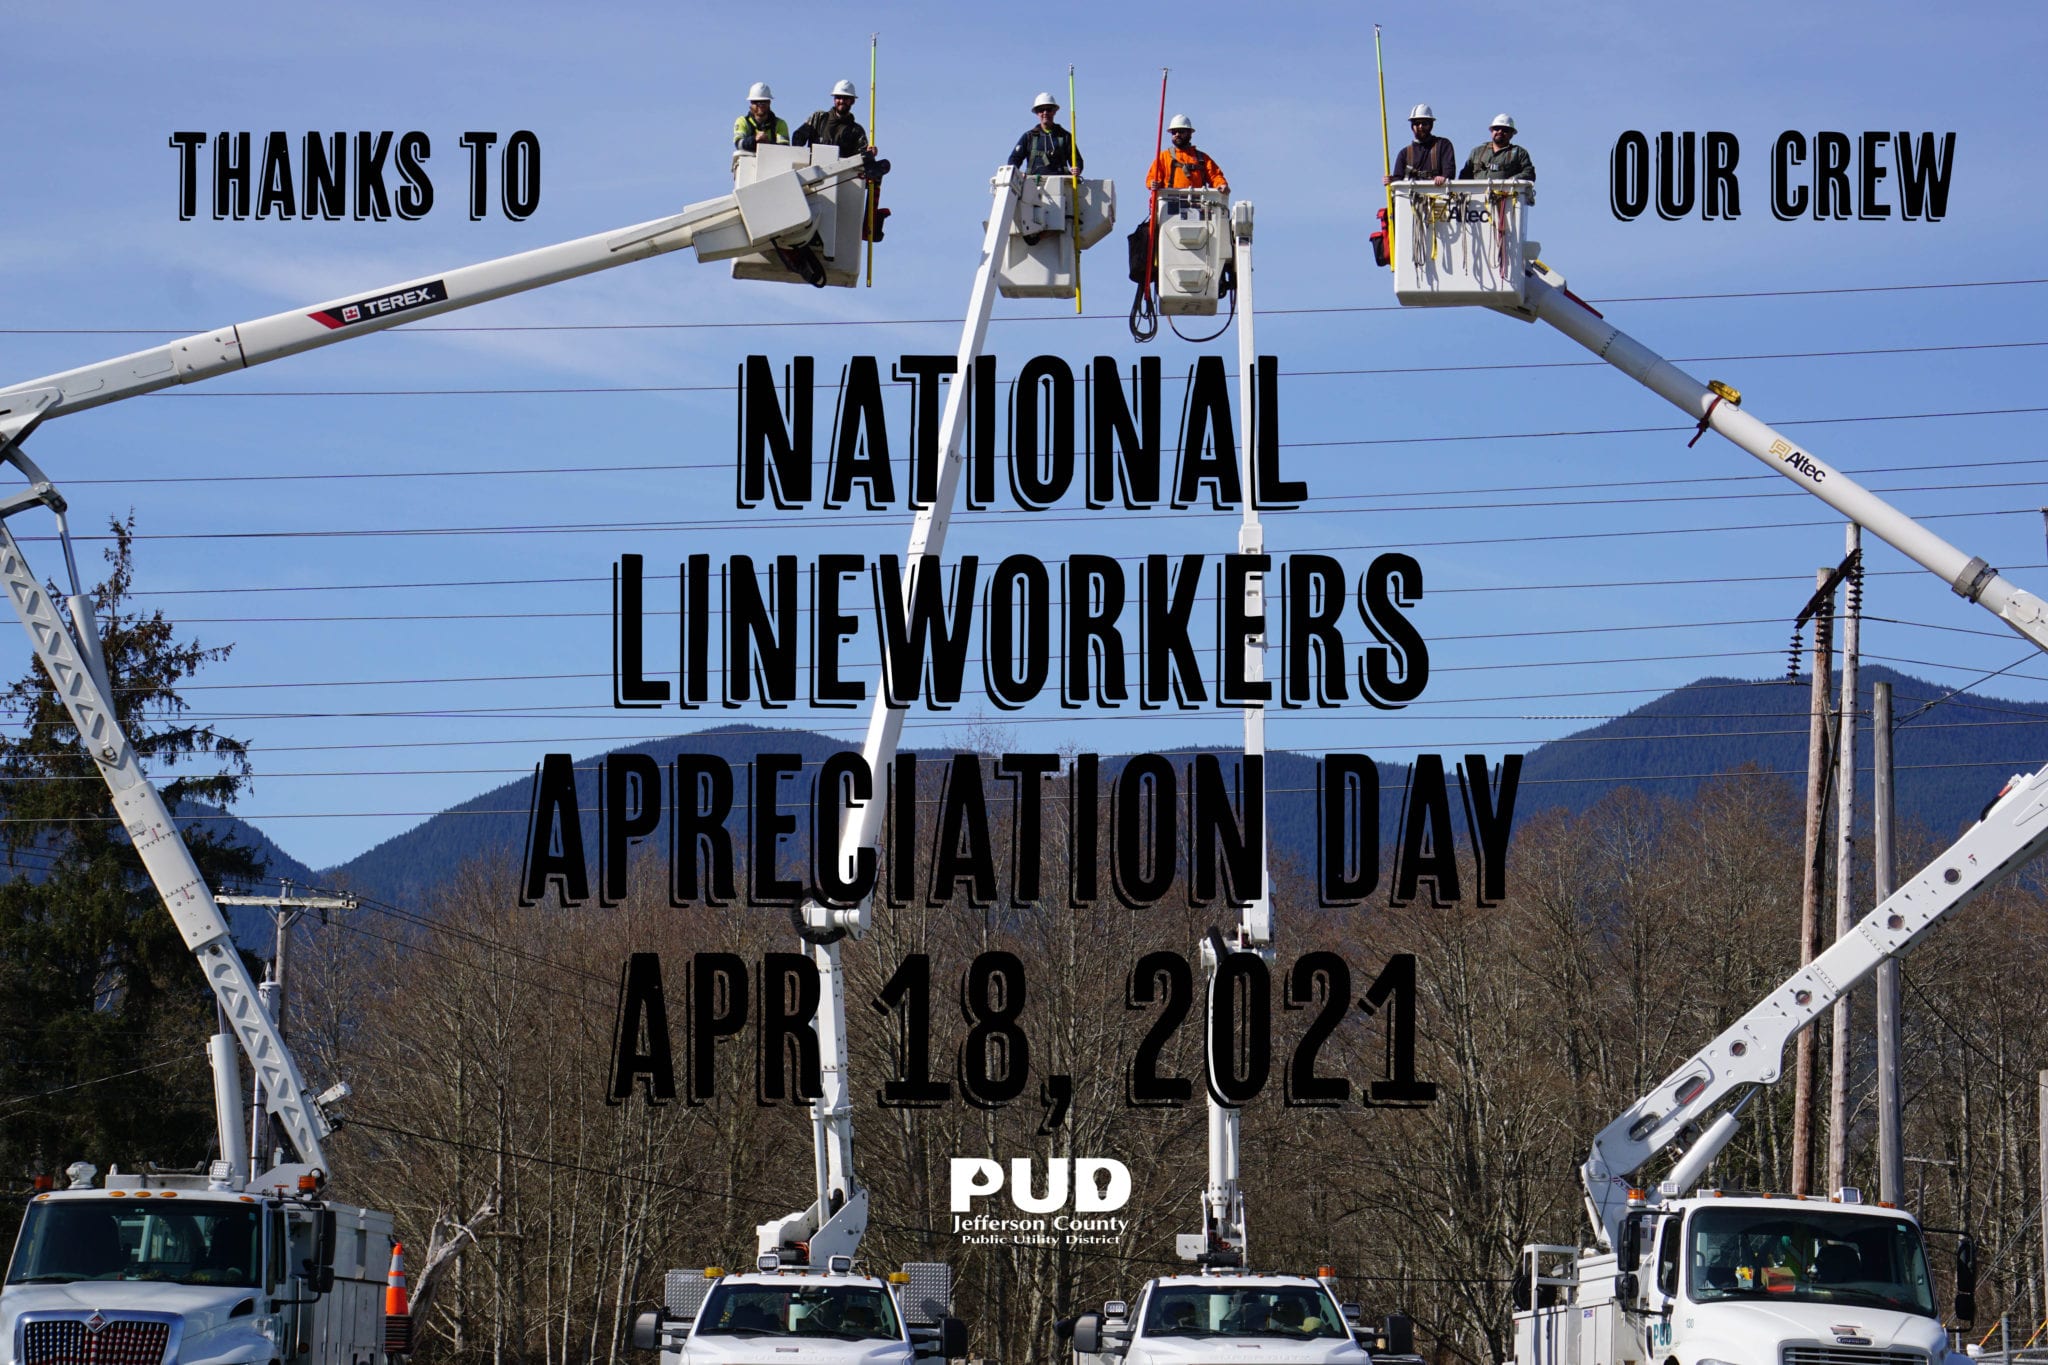 April 18th is National Lineworker Appreciation Day JPUD